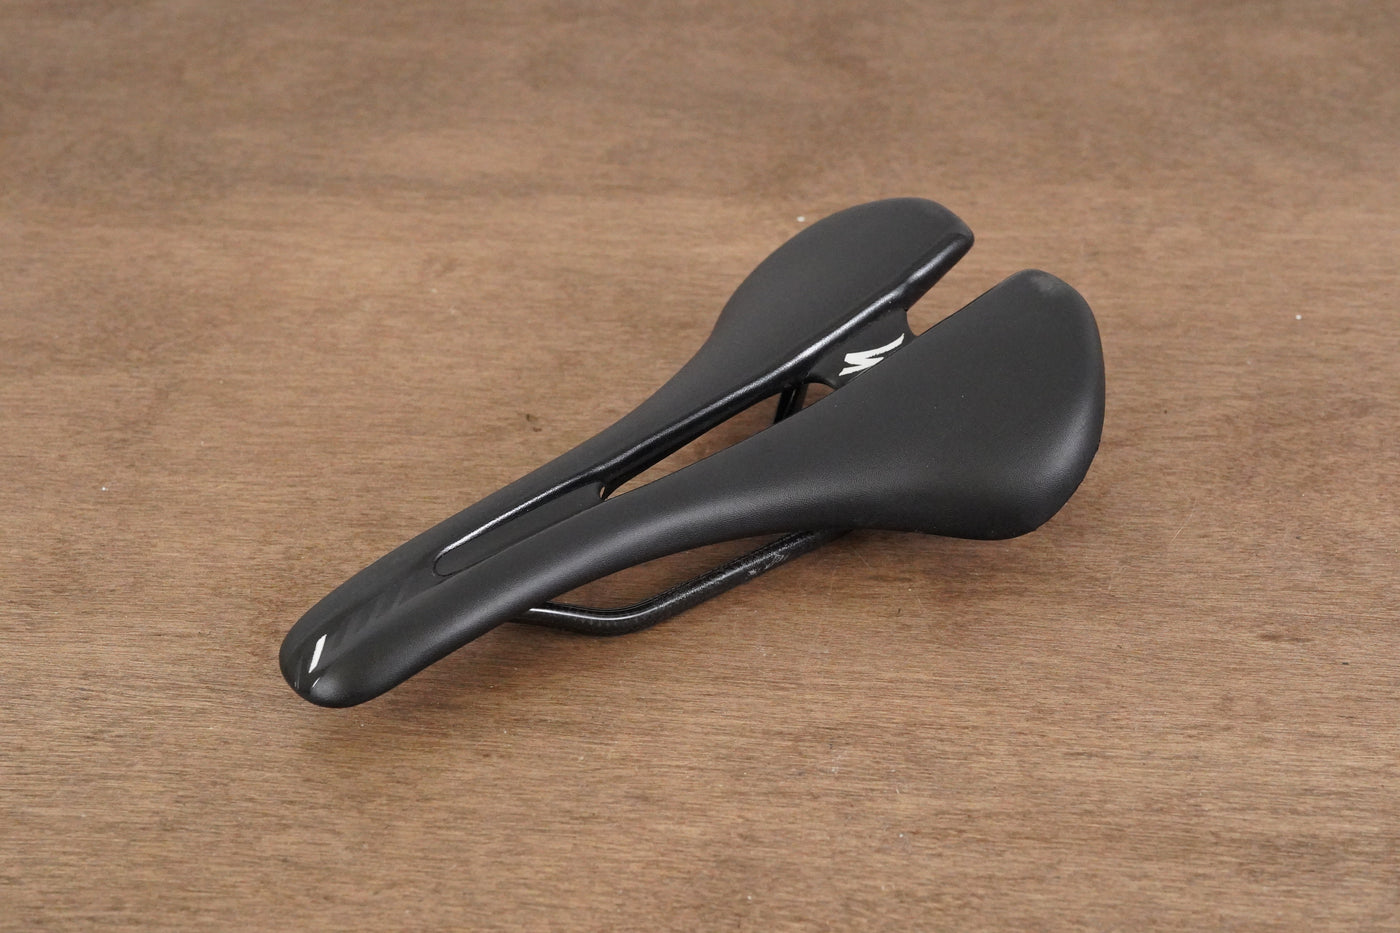 155mm Specialized Romin Evo Pro Carbon Rail Saddle 162g